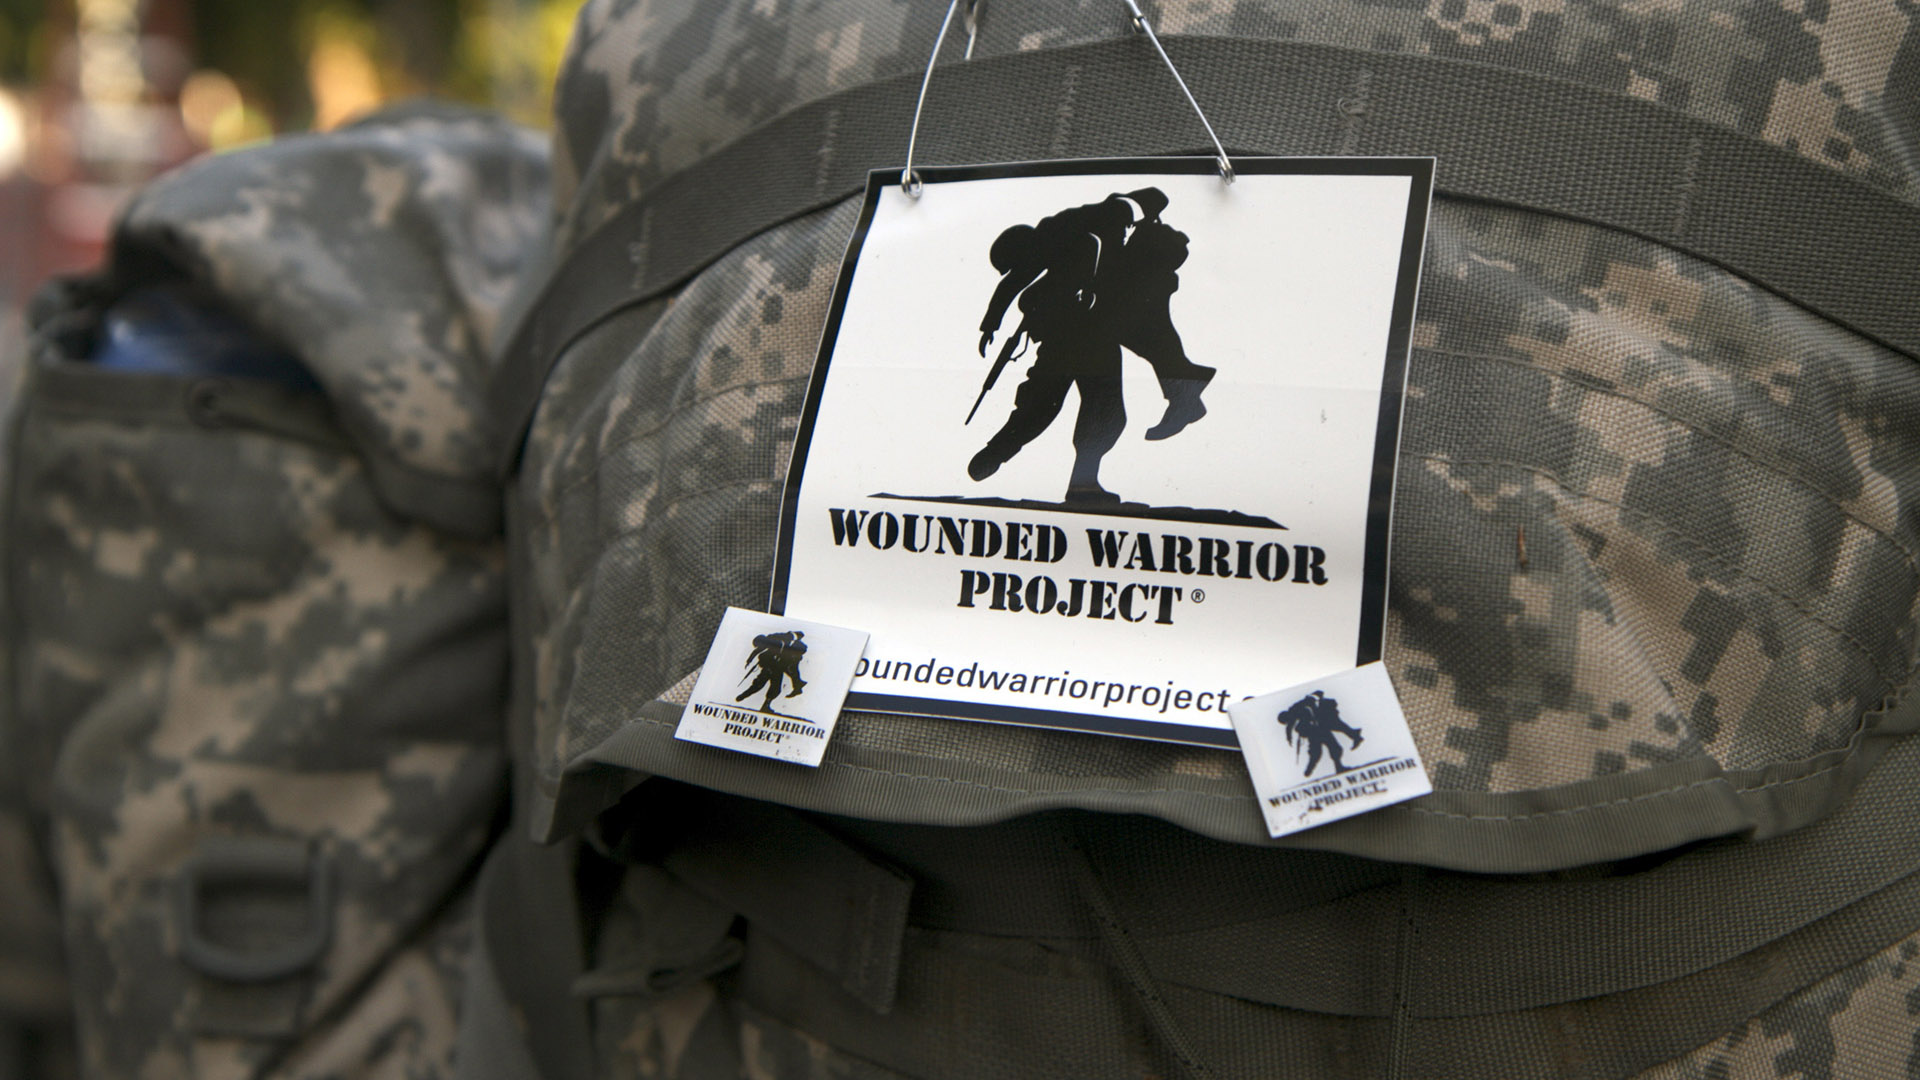 Wounded Warrior Project is being sued for discrimination